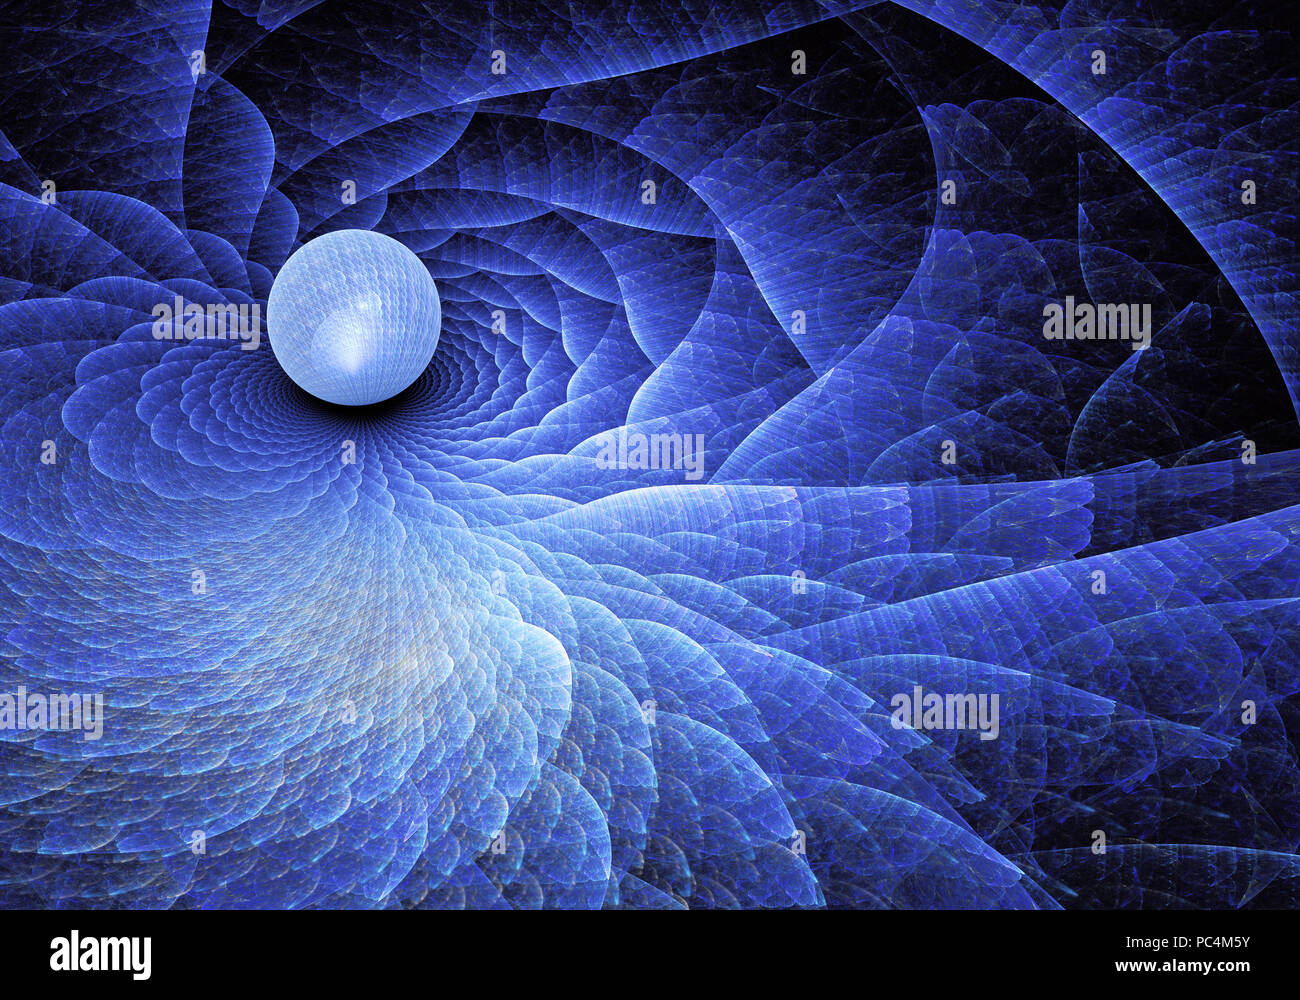 Abstract fractal patterns and shapes, 3D rendering Stock Photo